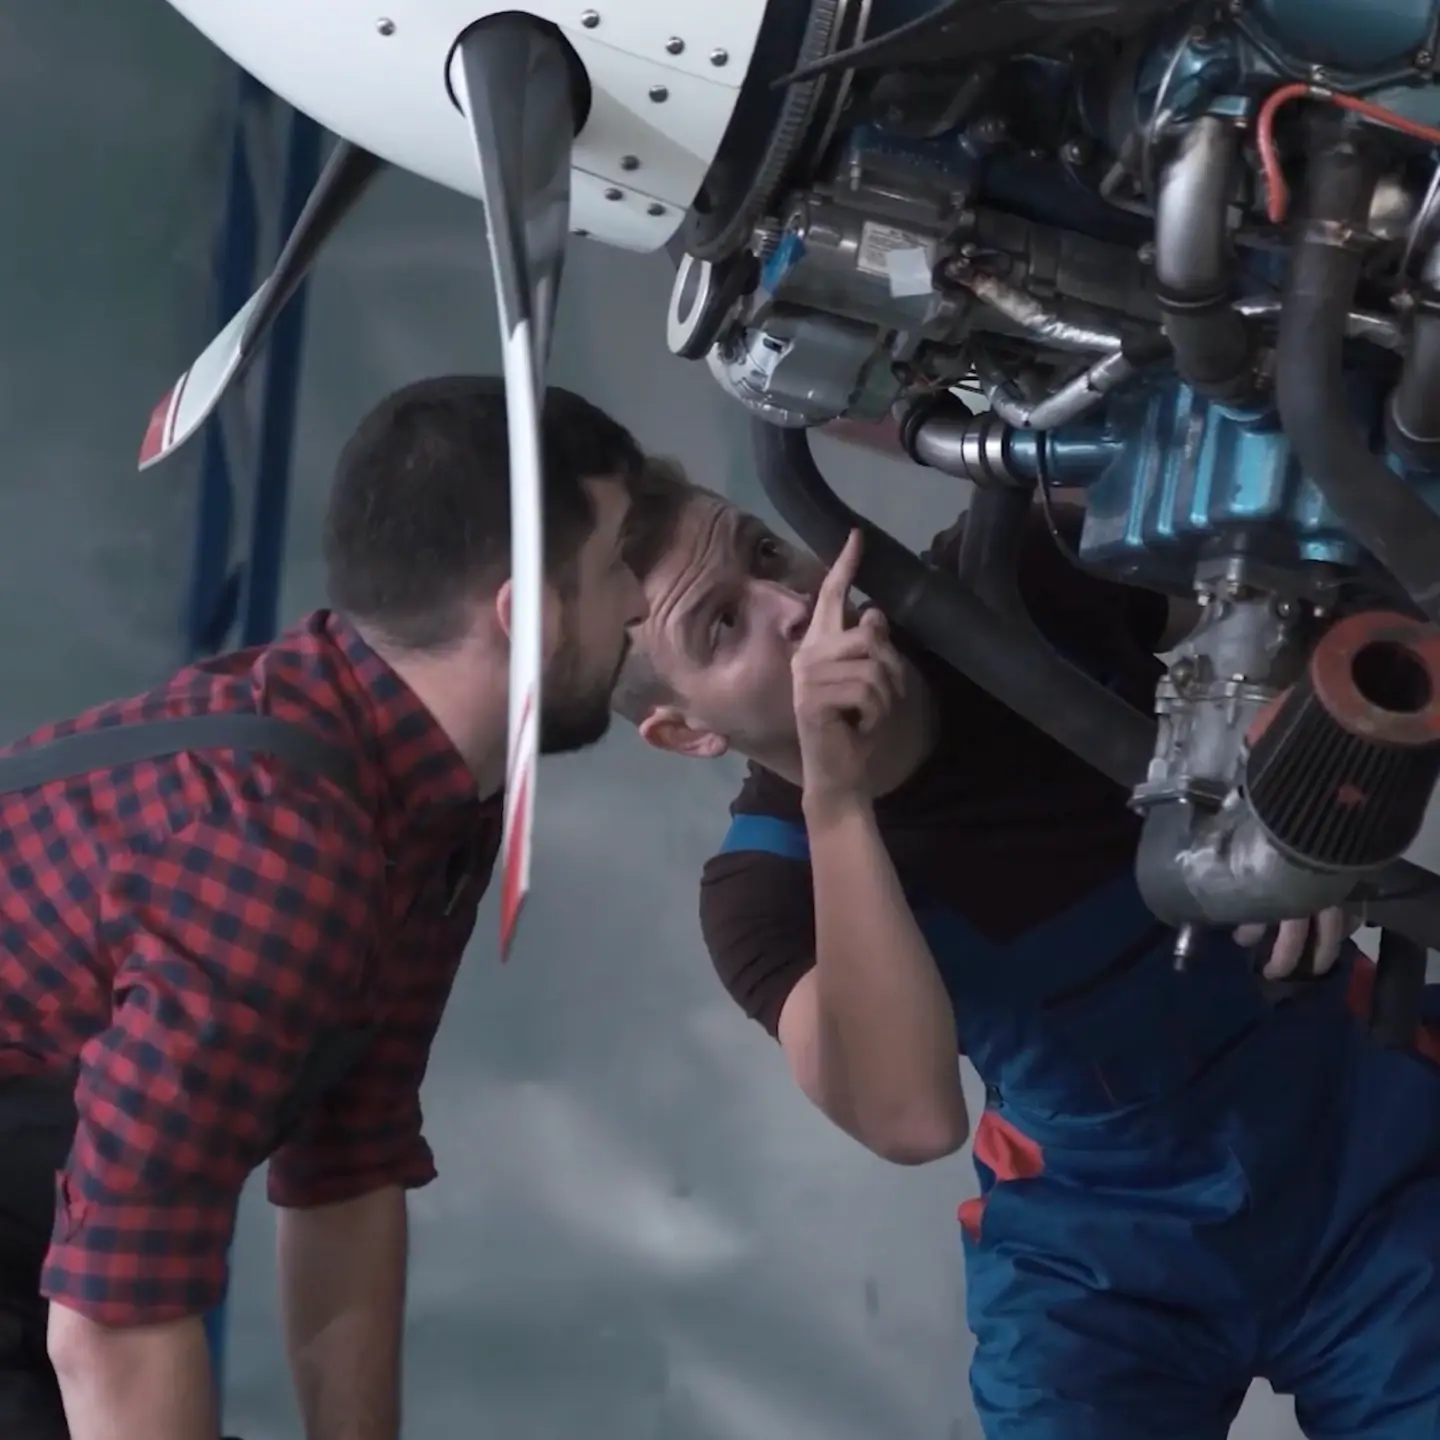 A close-up image of two men inspecting a plane engine at Northstar Technologies.